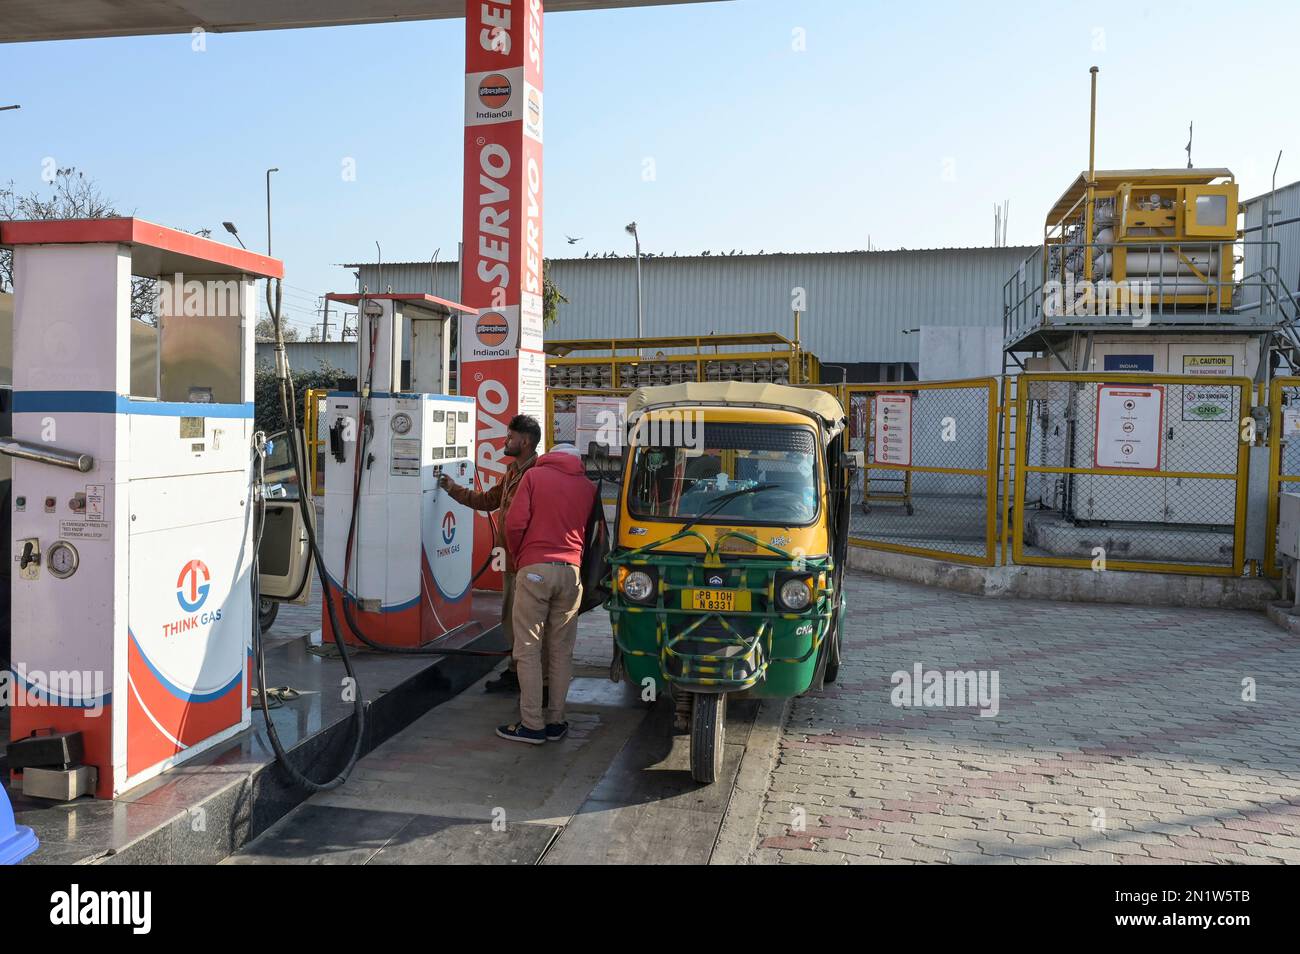 INDIA, Punjab, Indian Oil Fuel Station, Think gas CNG gas compresso gas naturale, Bajaj Auto-Rickshaw / INDIEN, Indian Oil Tankstelle, Think gas CNG komprimiertes Erdgas, Methangas Foto Stock